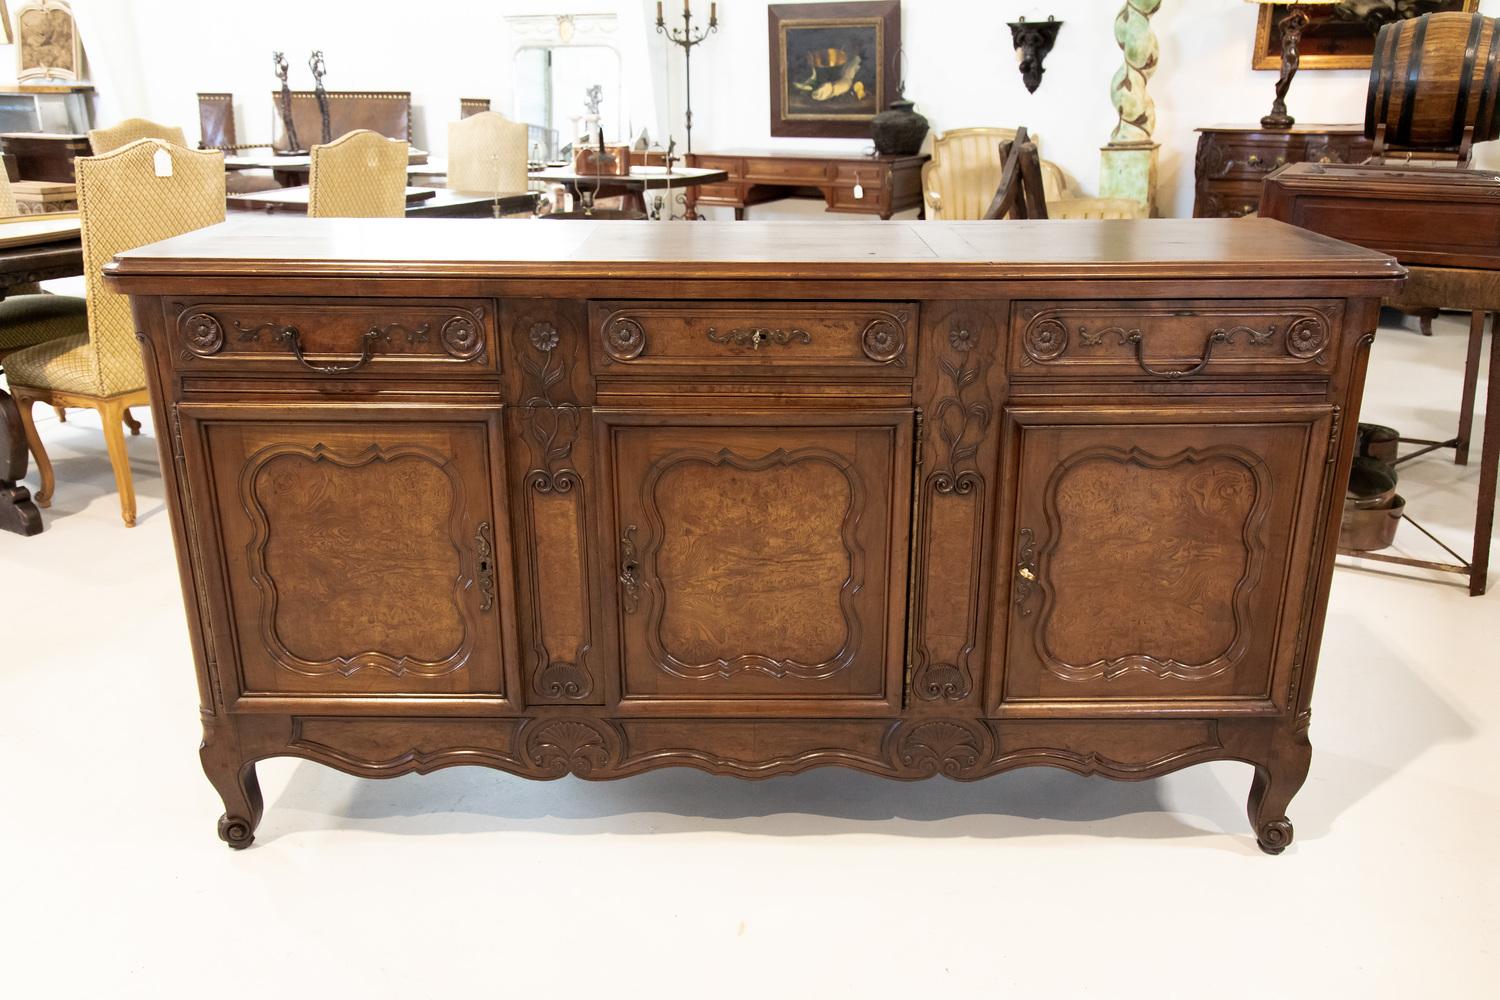 19th century French Country Louis XV style enfilade buffet handcrafted of walnut and burled walnut in the typical technique mastered by the skilled artisans of Bresse, circa 1880s. This beautiful provincial buffet features an inset walnut top above